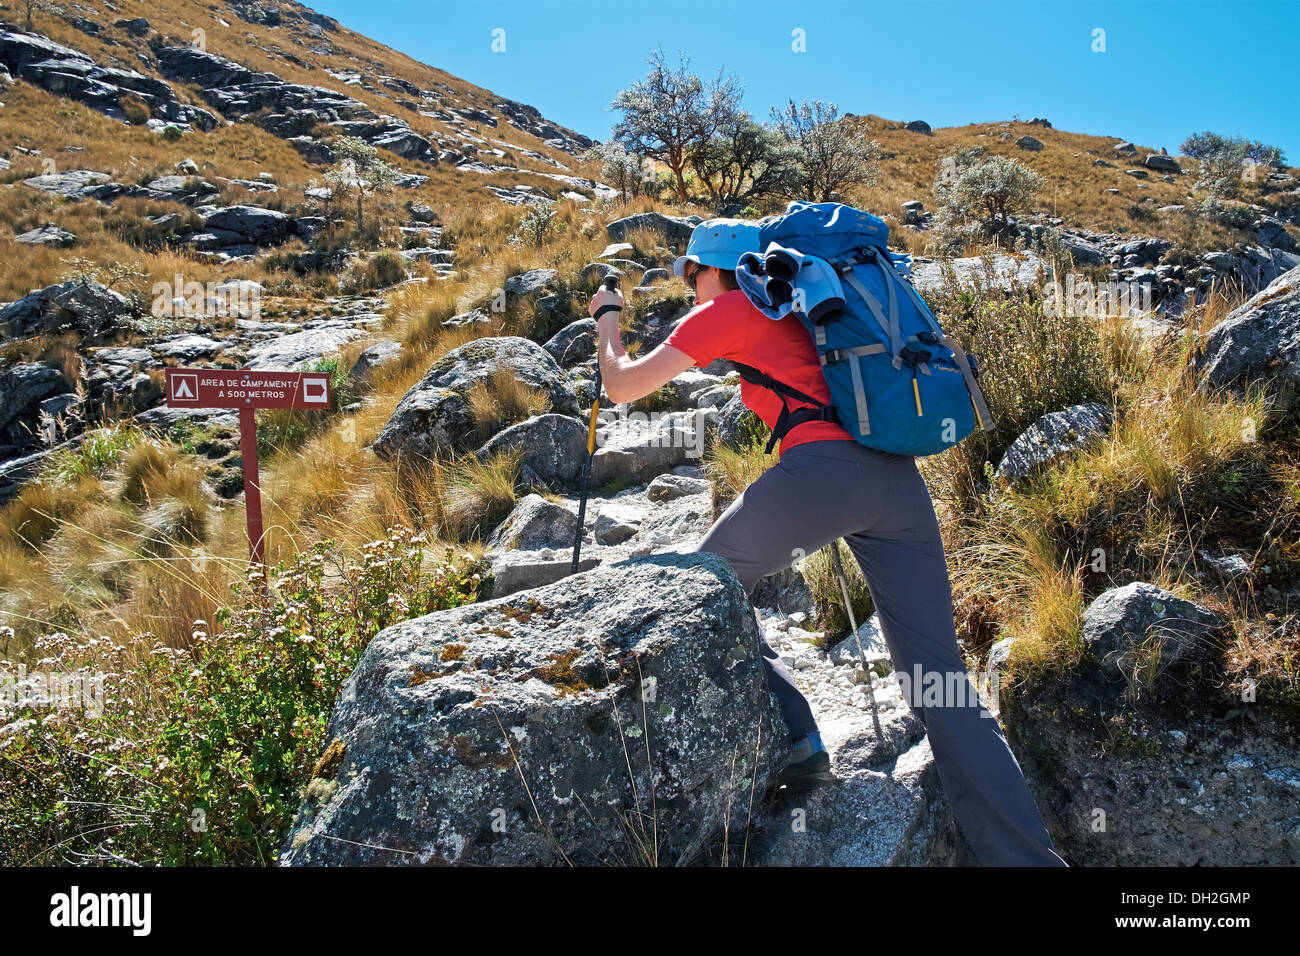 A hiker climbing Nev Churup trail, Huascaran National Park in the Andes, South America. Stock Photo